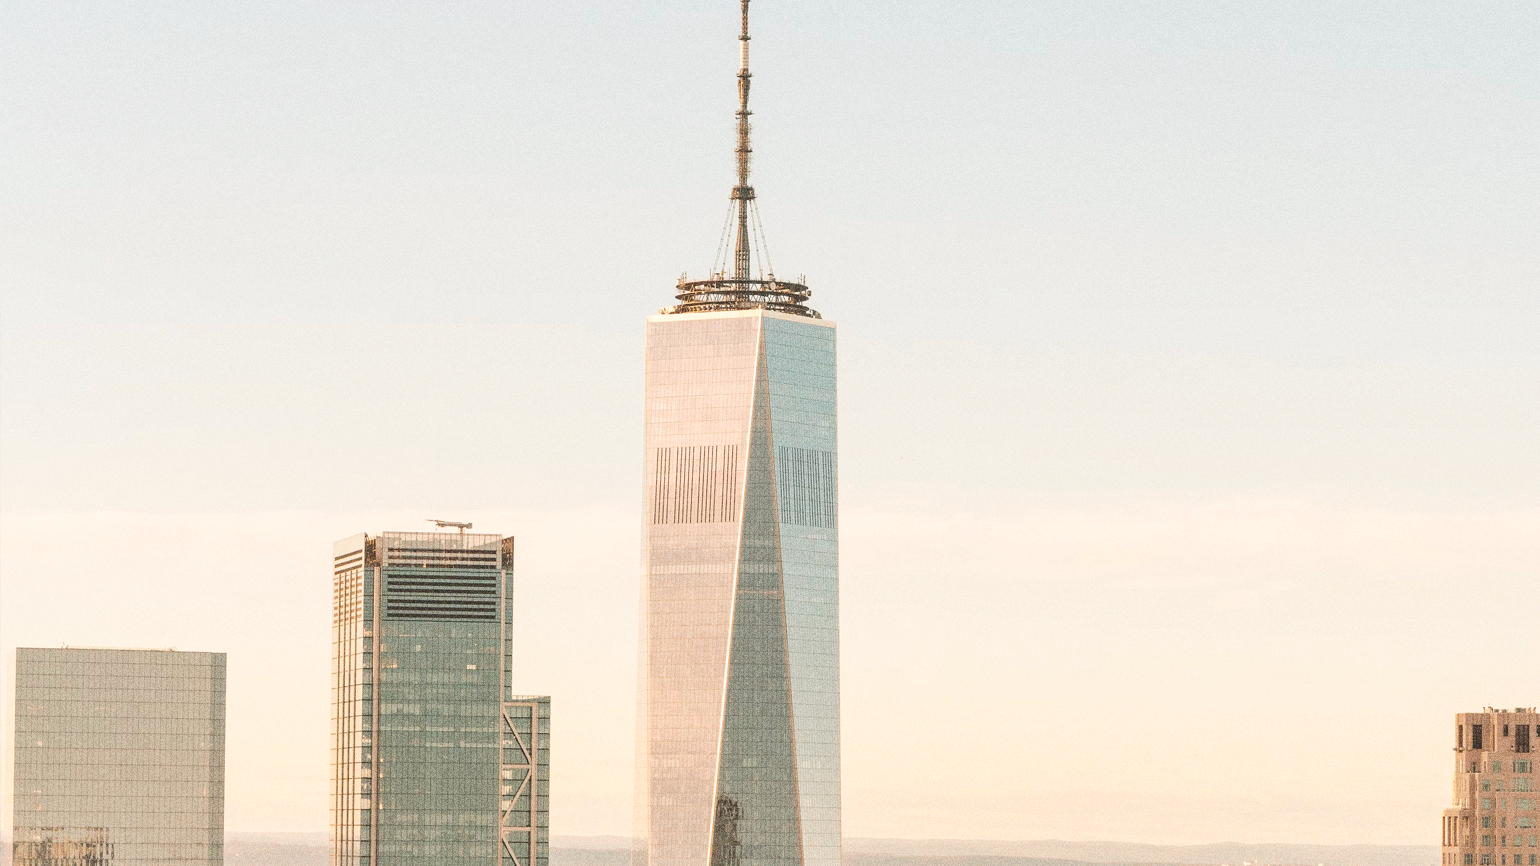 Landscape of the World Trade Center to showcase life goals.